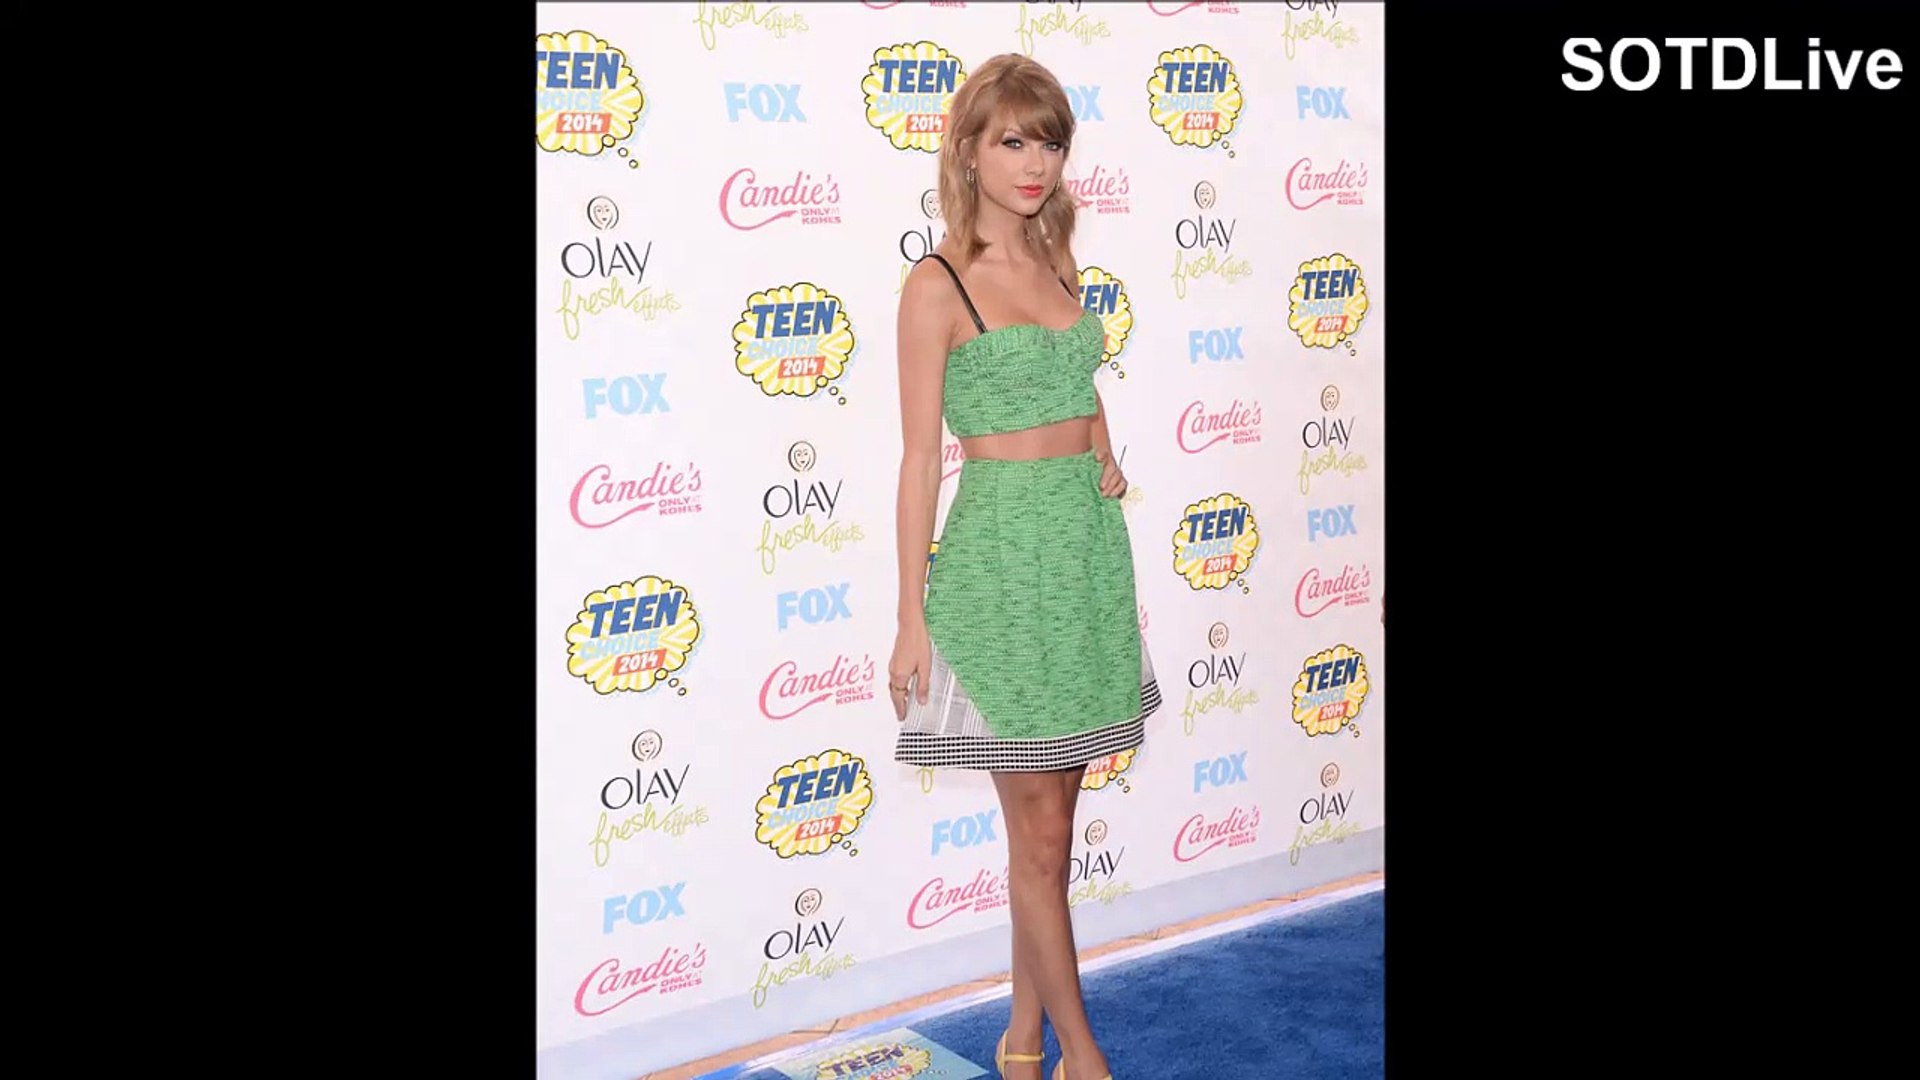 TAYLOR SWIFT looking ADORABLE in GREEN MINI SKIRT | SOTDLive | Episode 10